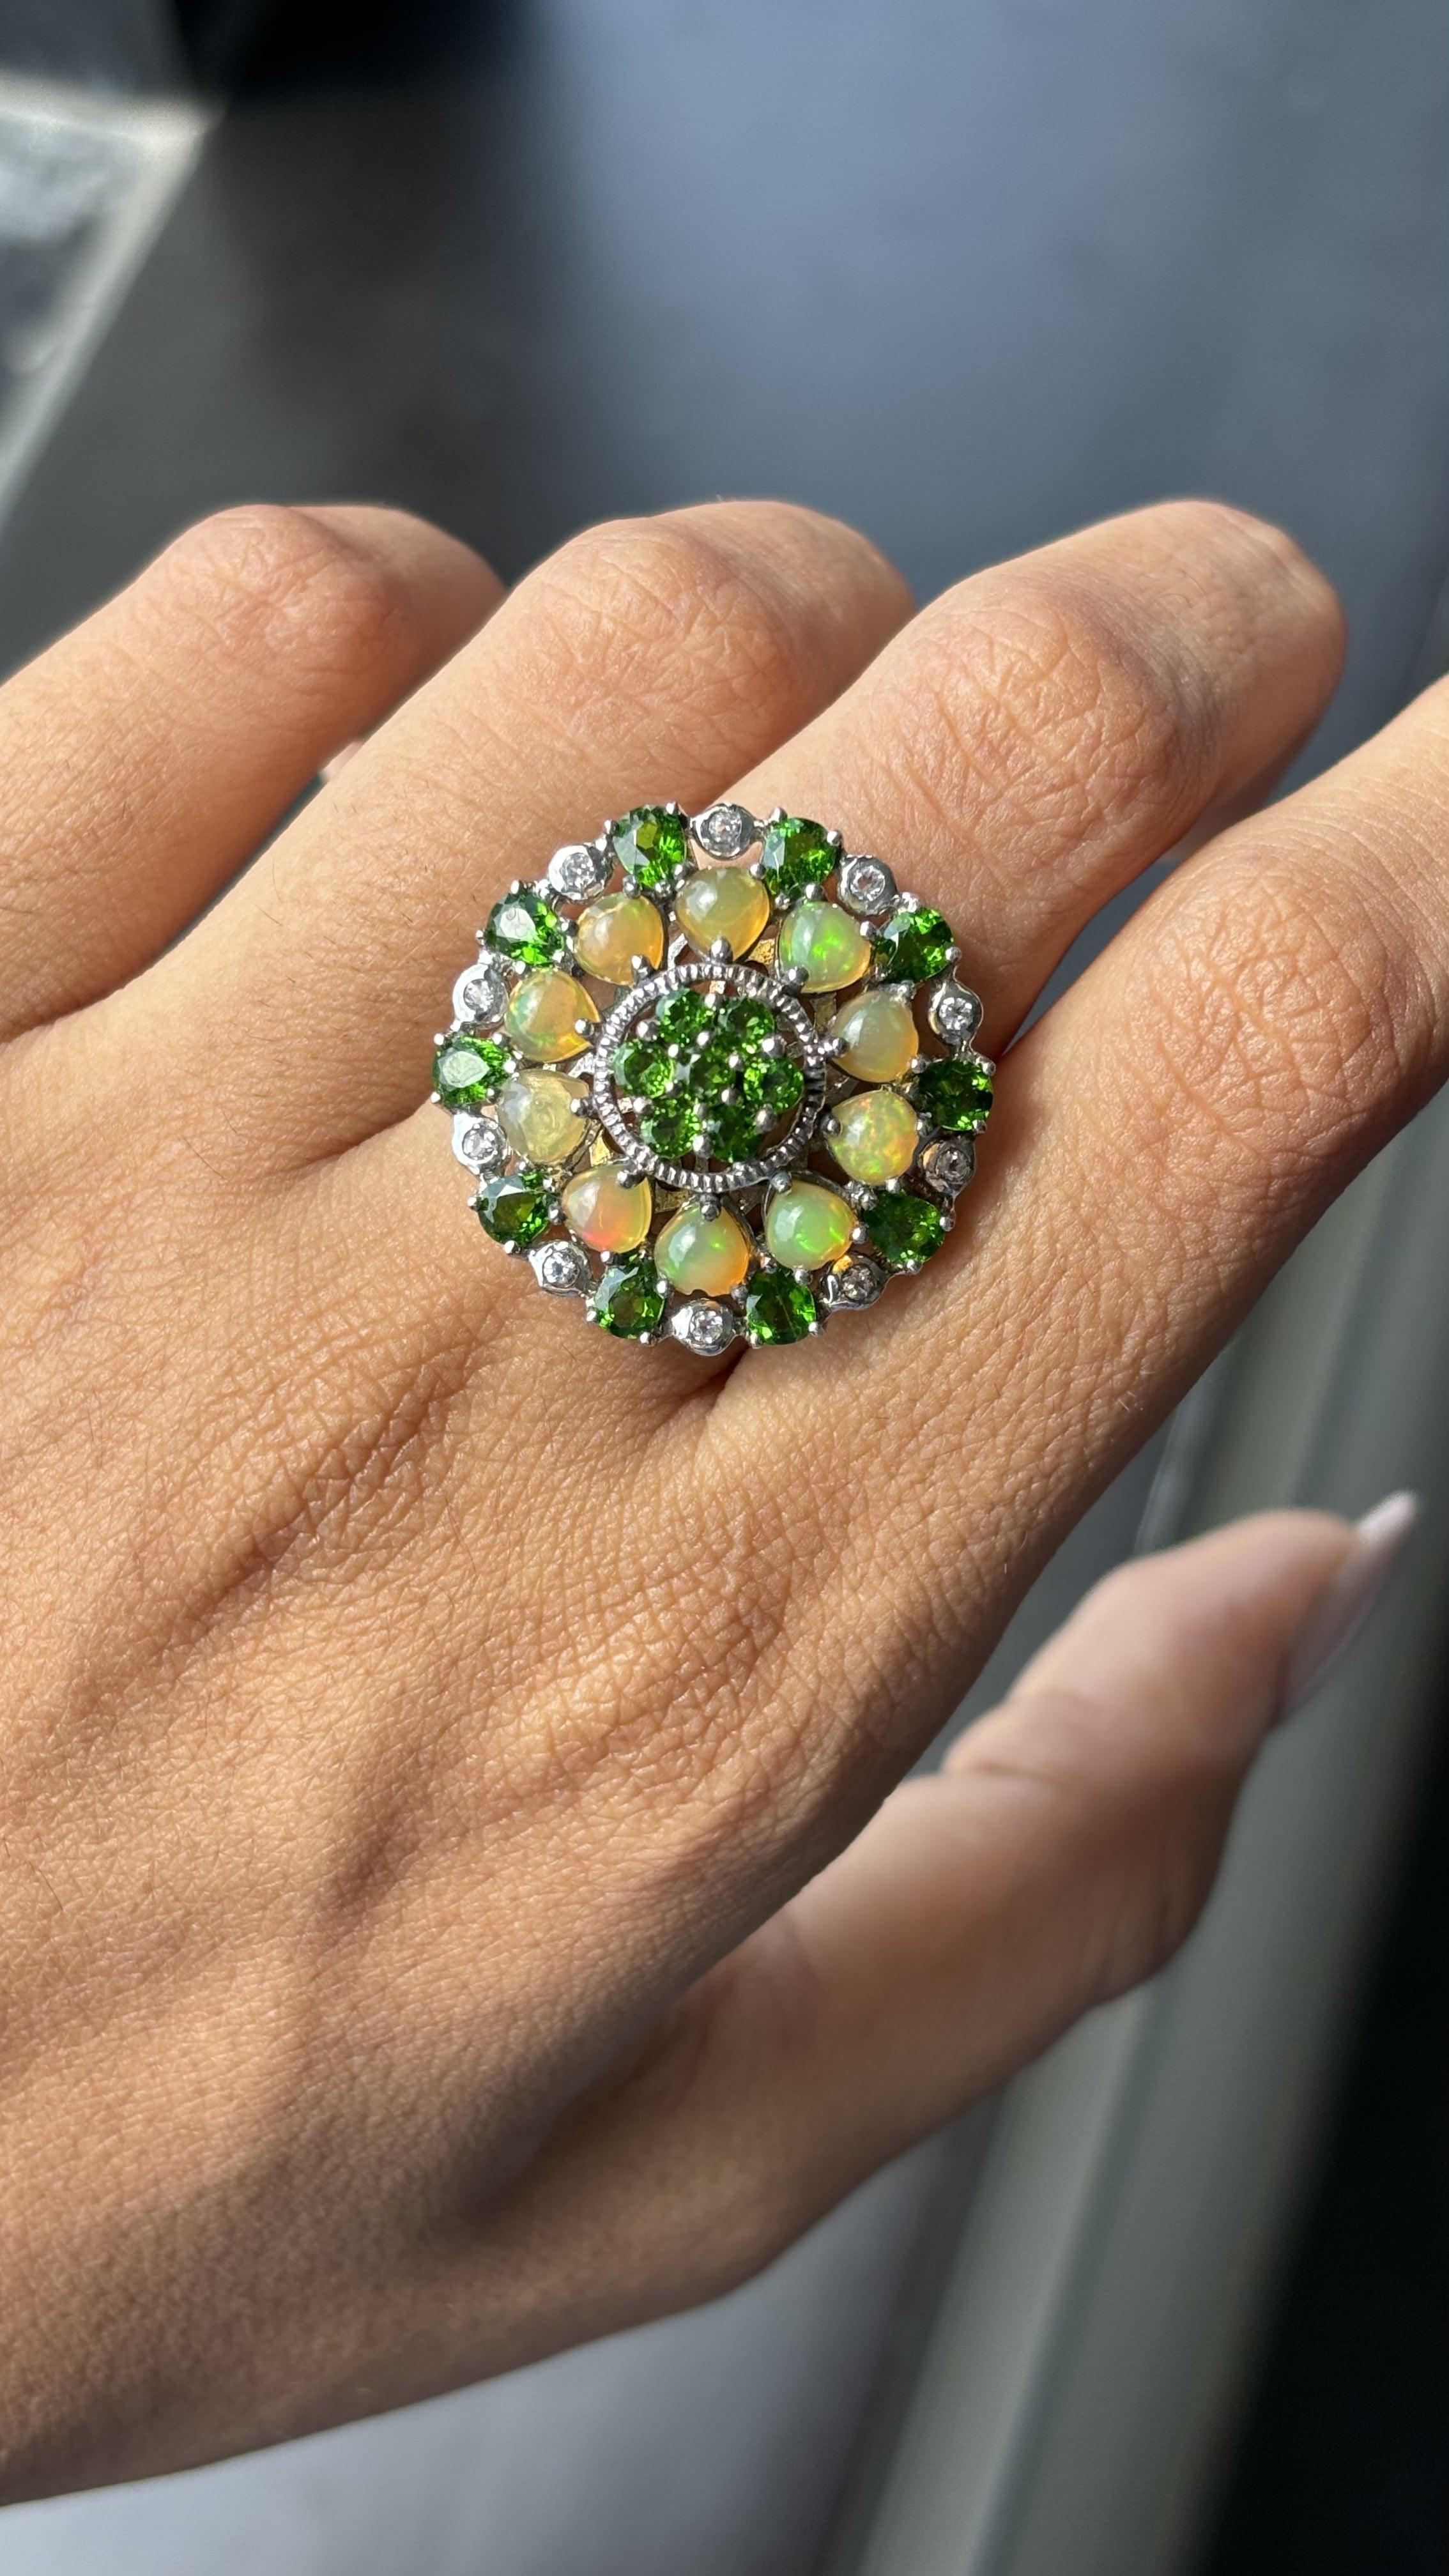 Gilded Age Antique circa 1900s Diopside, Opal & White Topaz Fancy Cocktail Ring in Silver For Sale